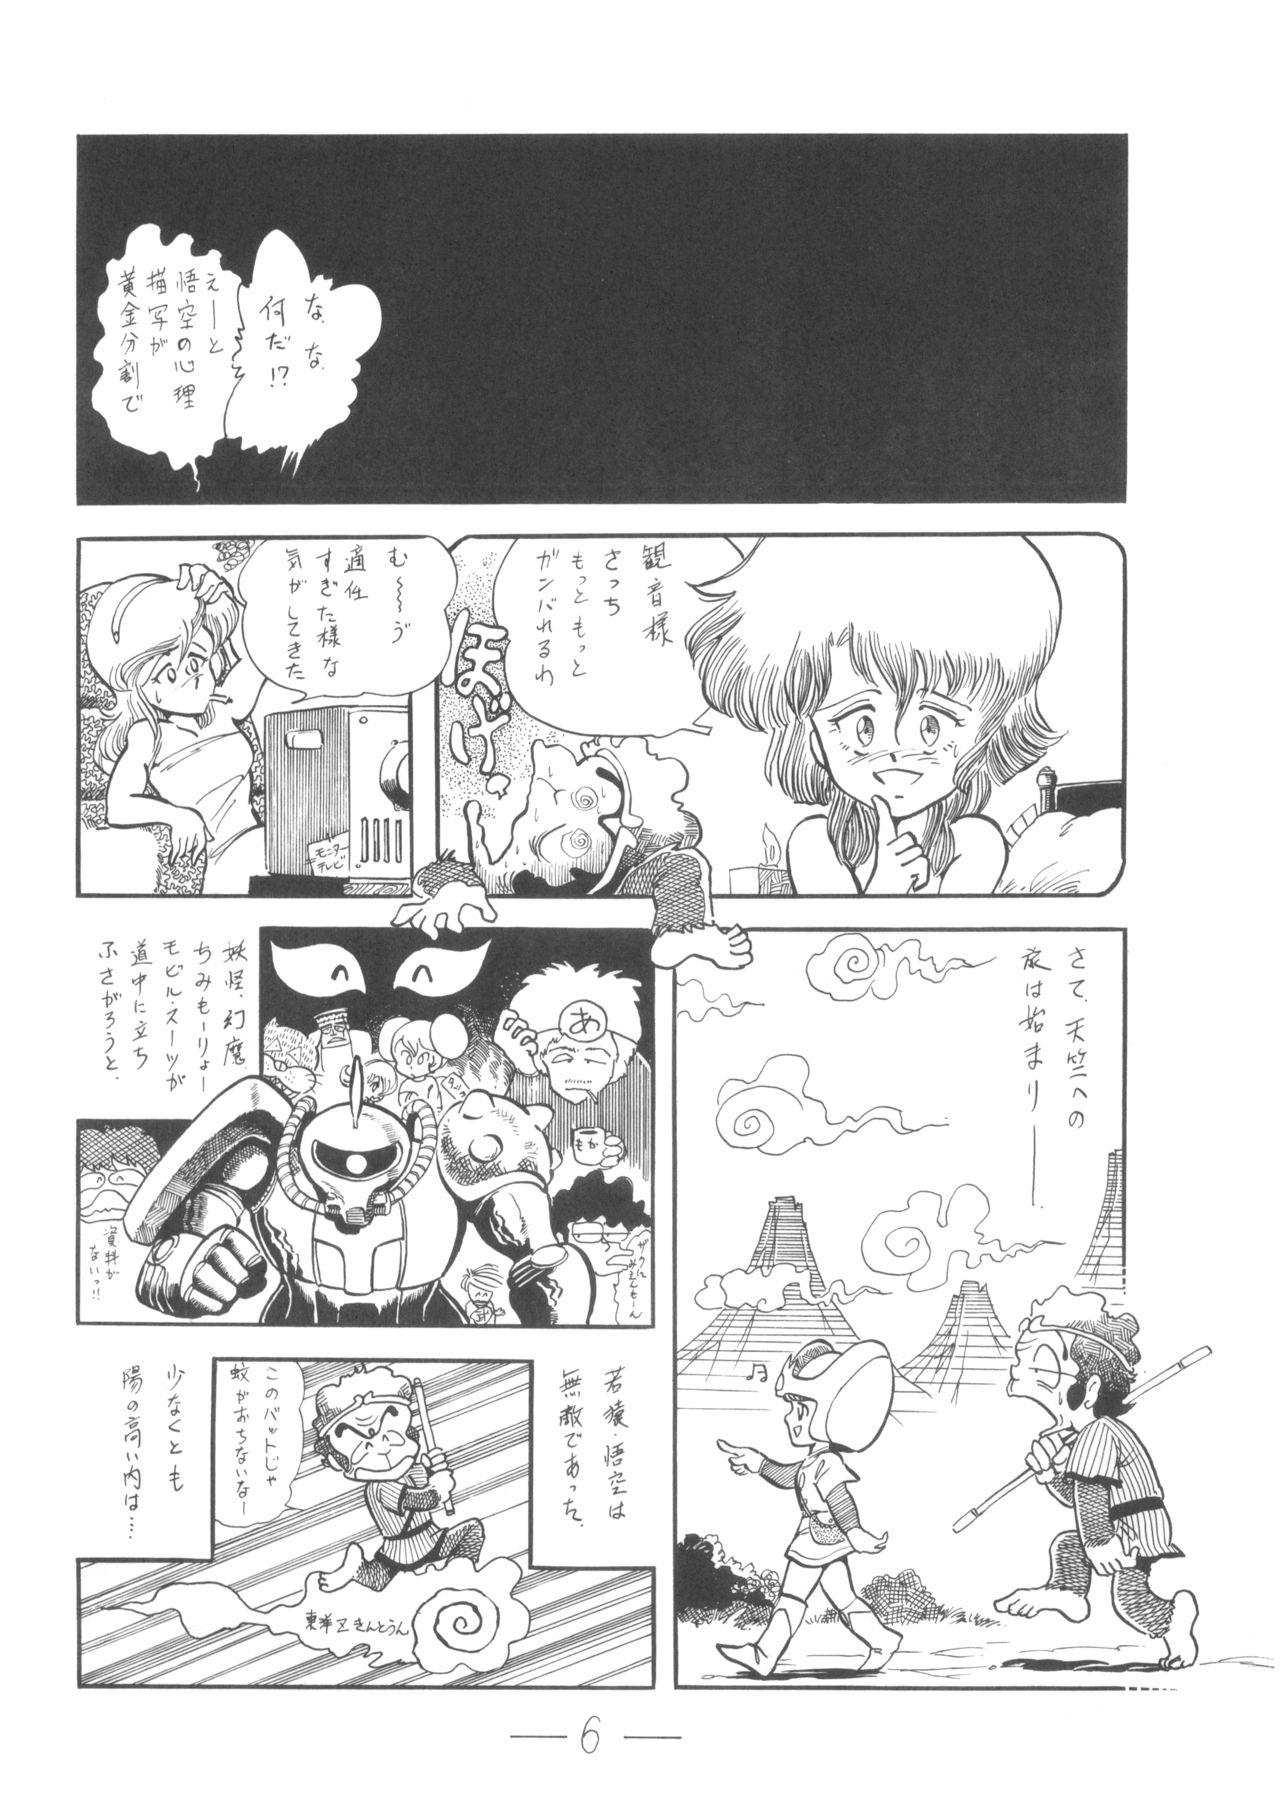 Celeb Cybele Vol.6 - Dirty pair Journey to the west Nudity - Page 7